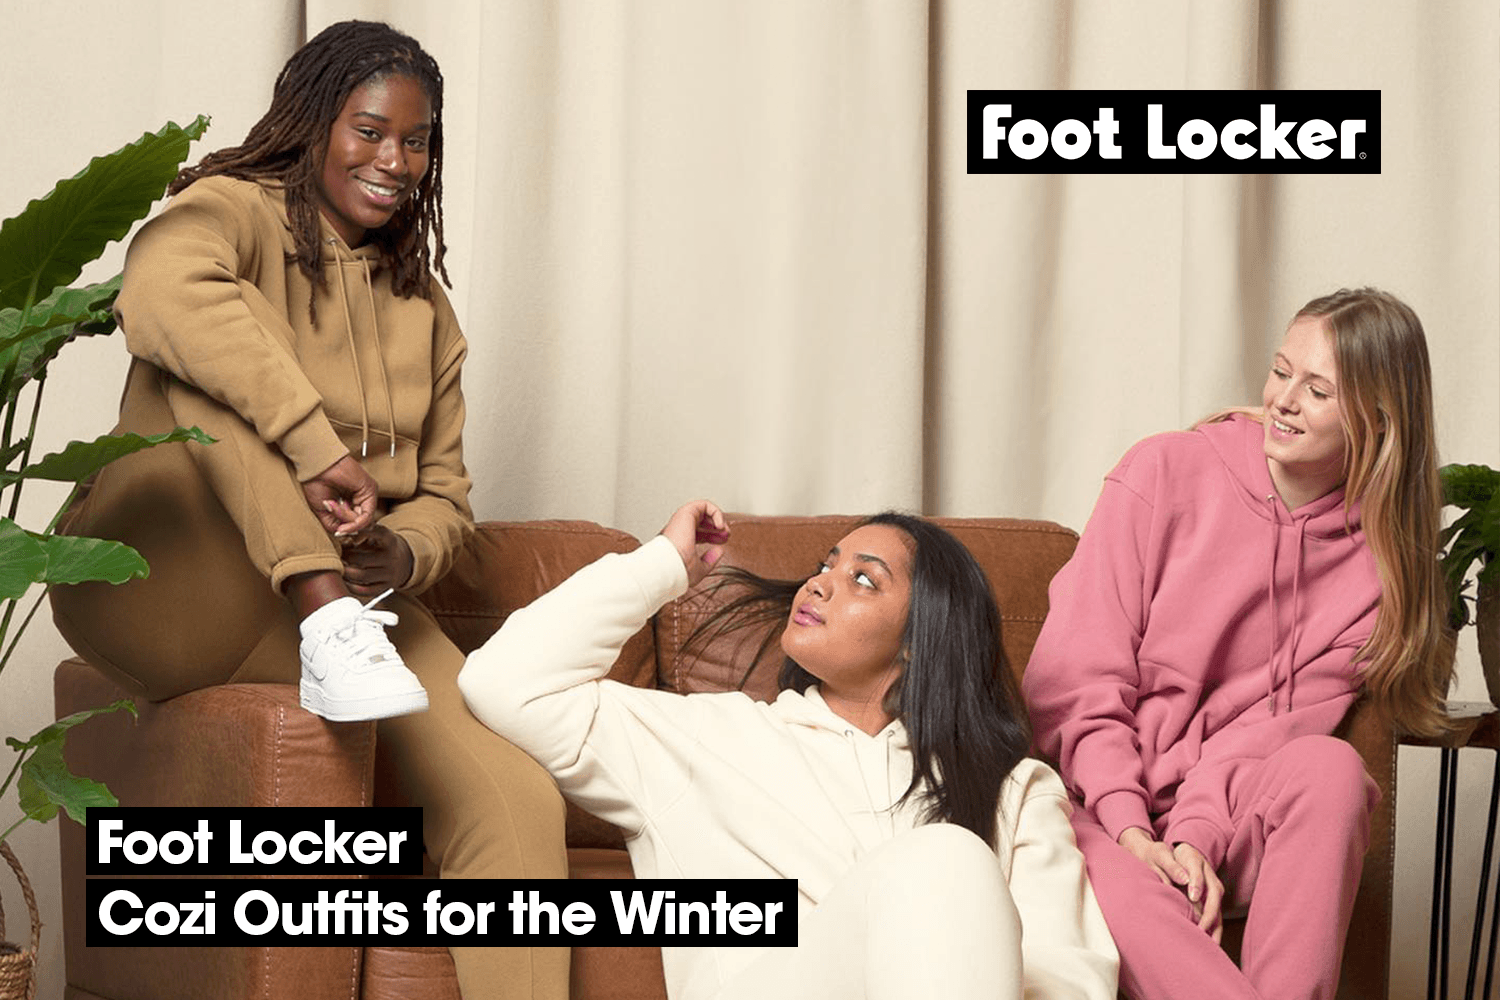 Shop your Cozi Outfits now at Foot Locker